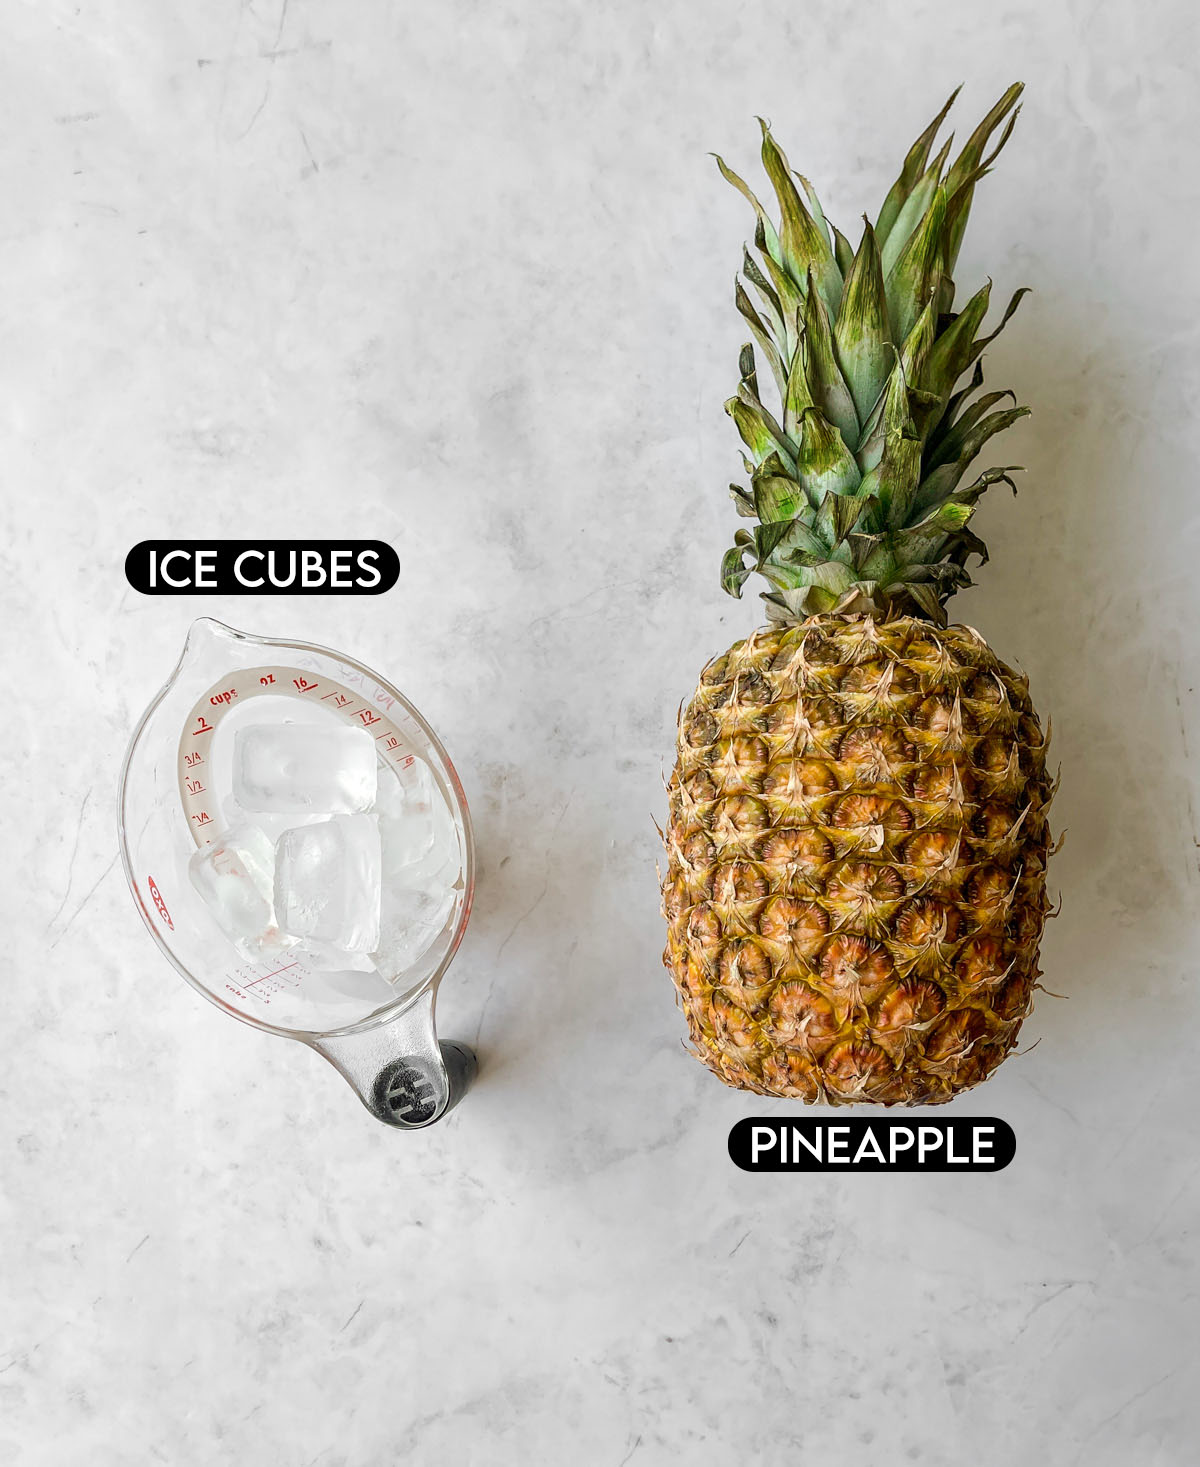 Labeled ingredients for Pineapple Slushie.